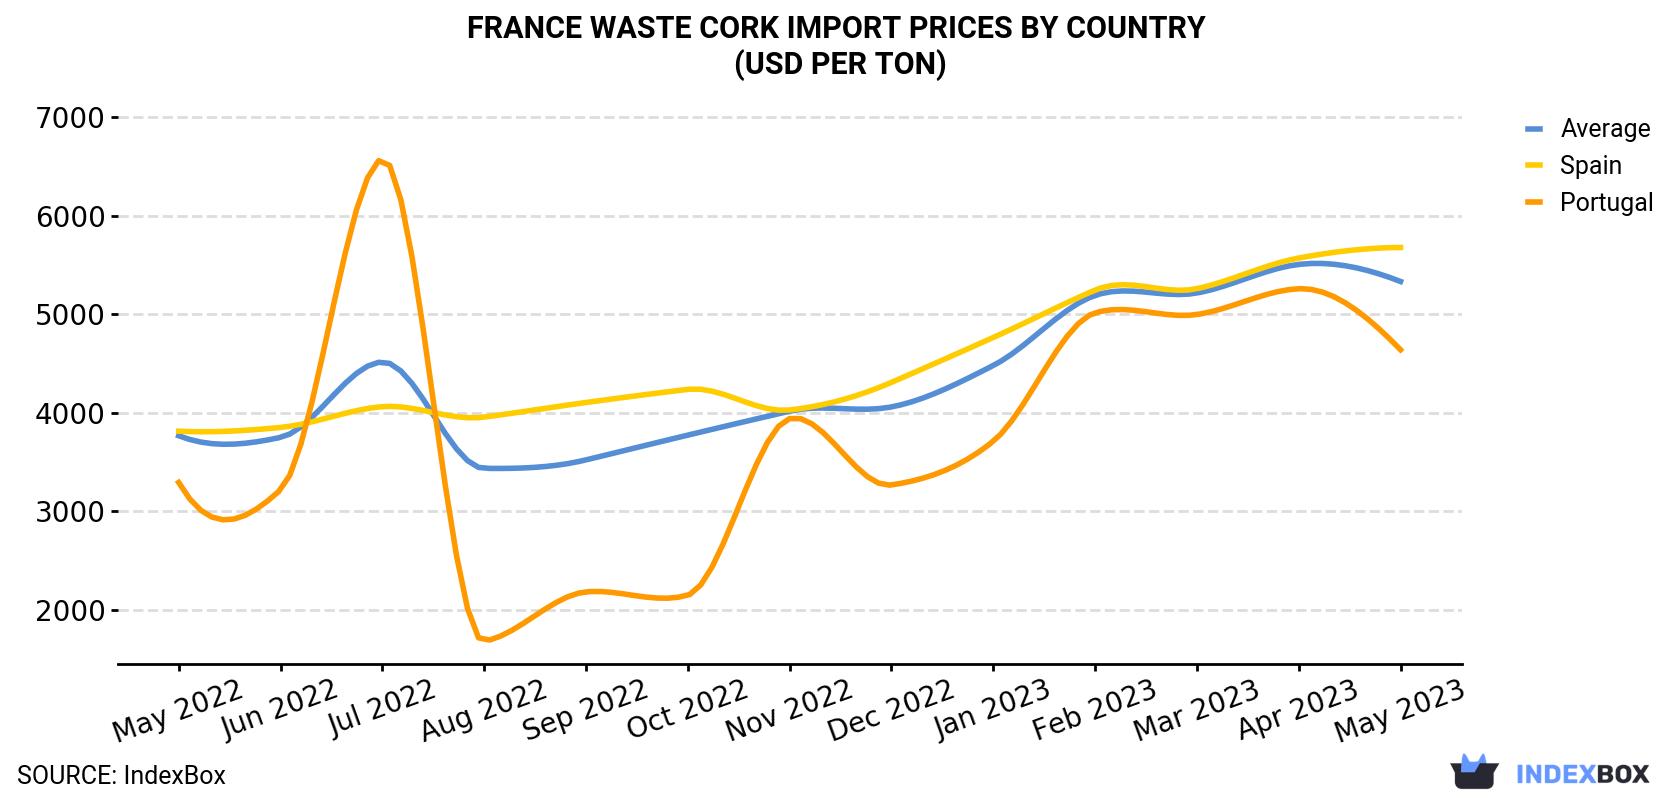 France Waste Cork Import Prices By Country (USD Per Ton)